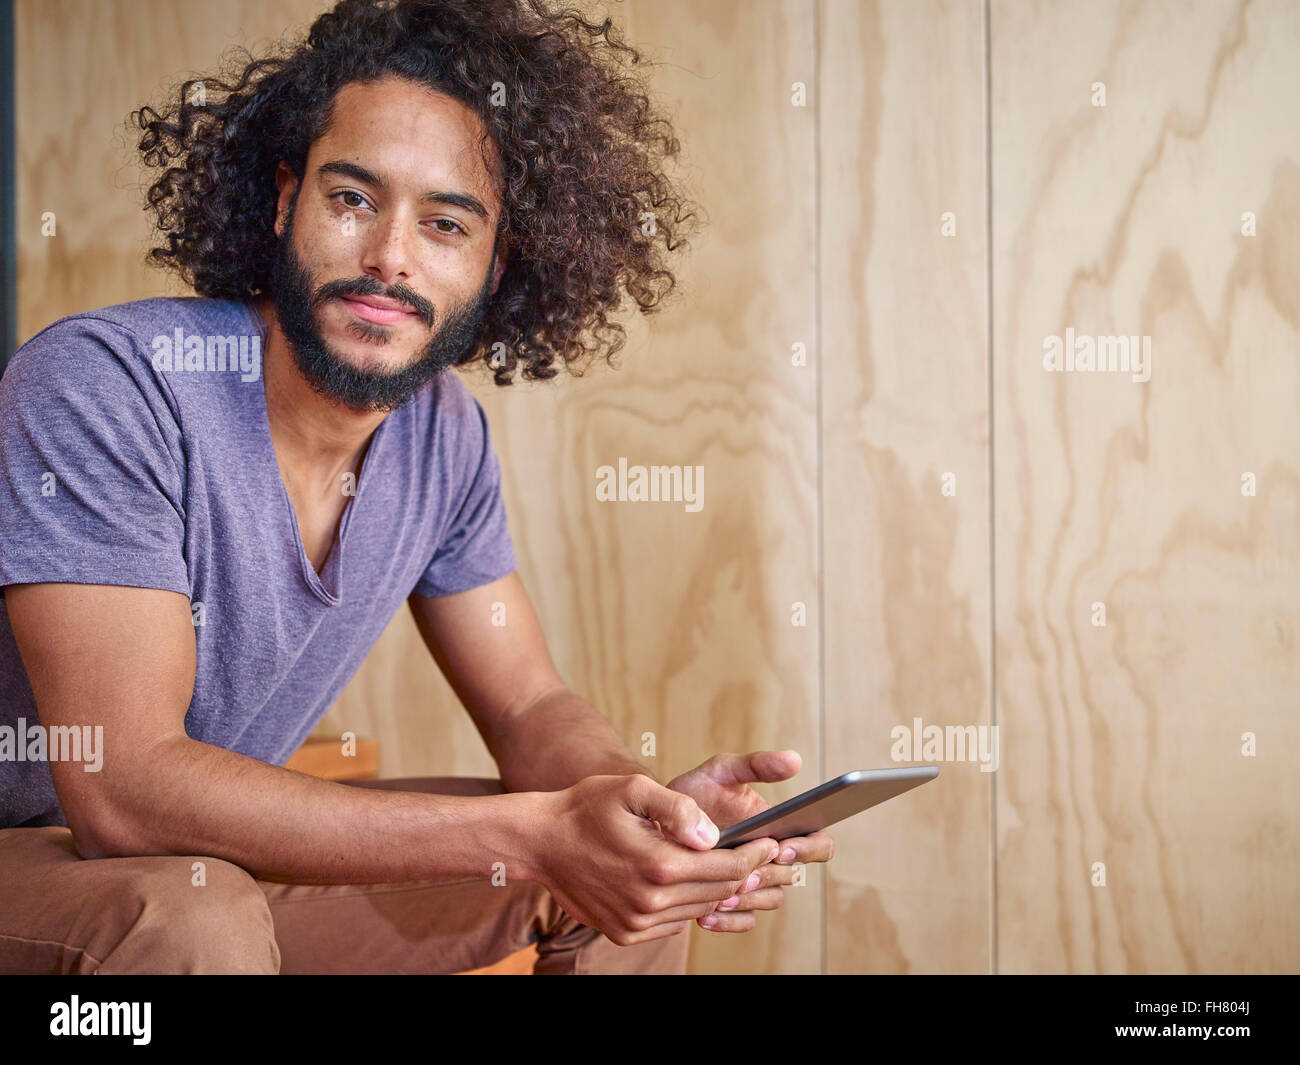 Portrait of young man holding digital tablet Stock Photo